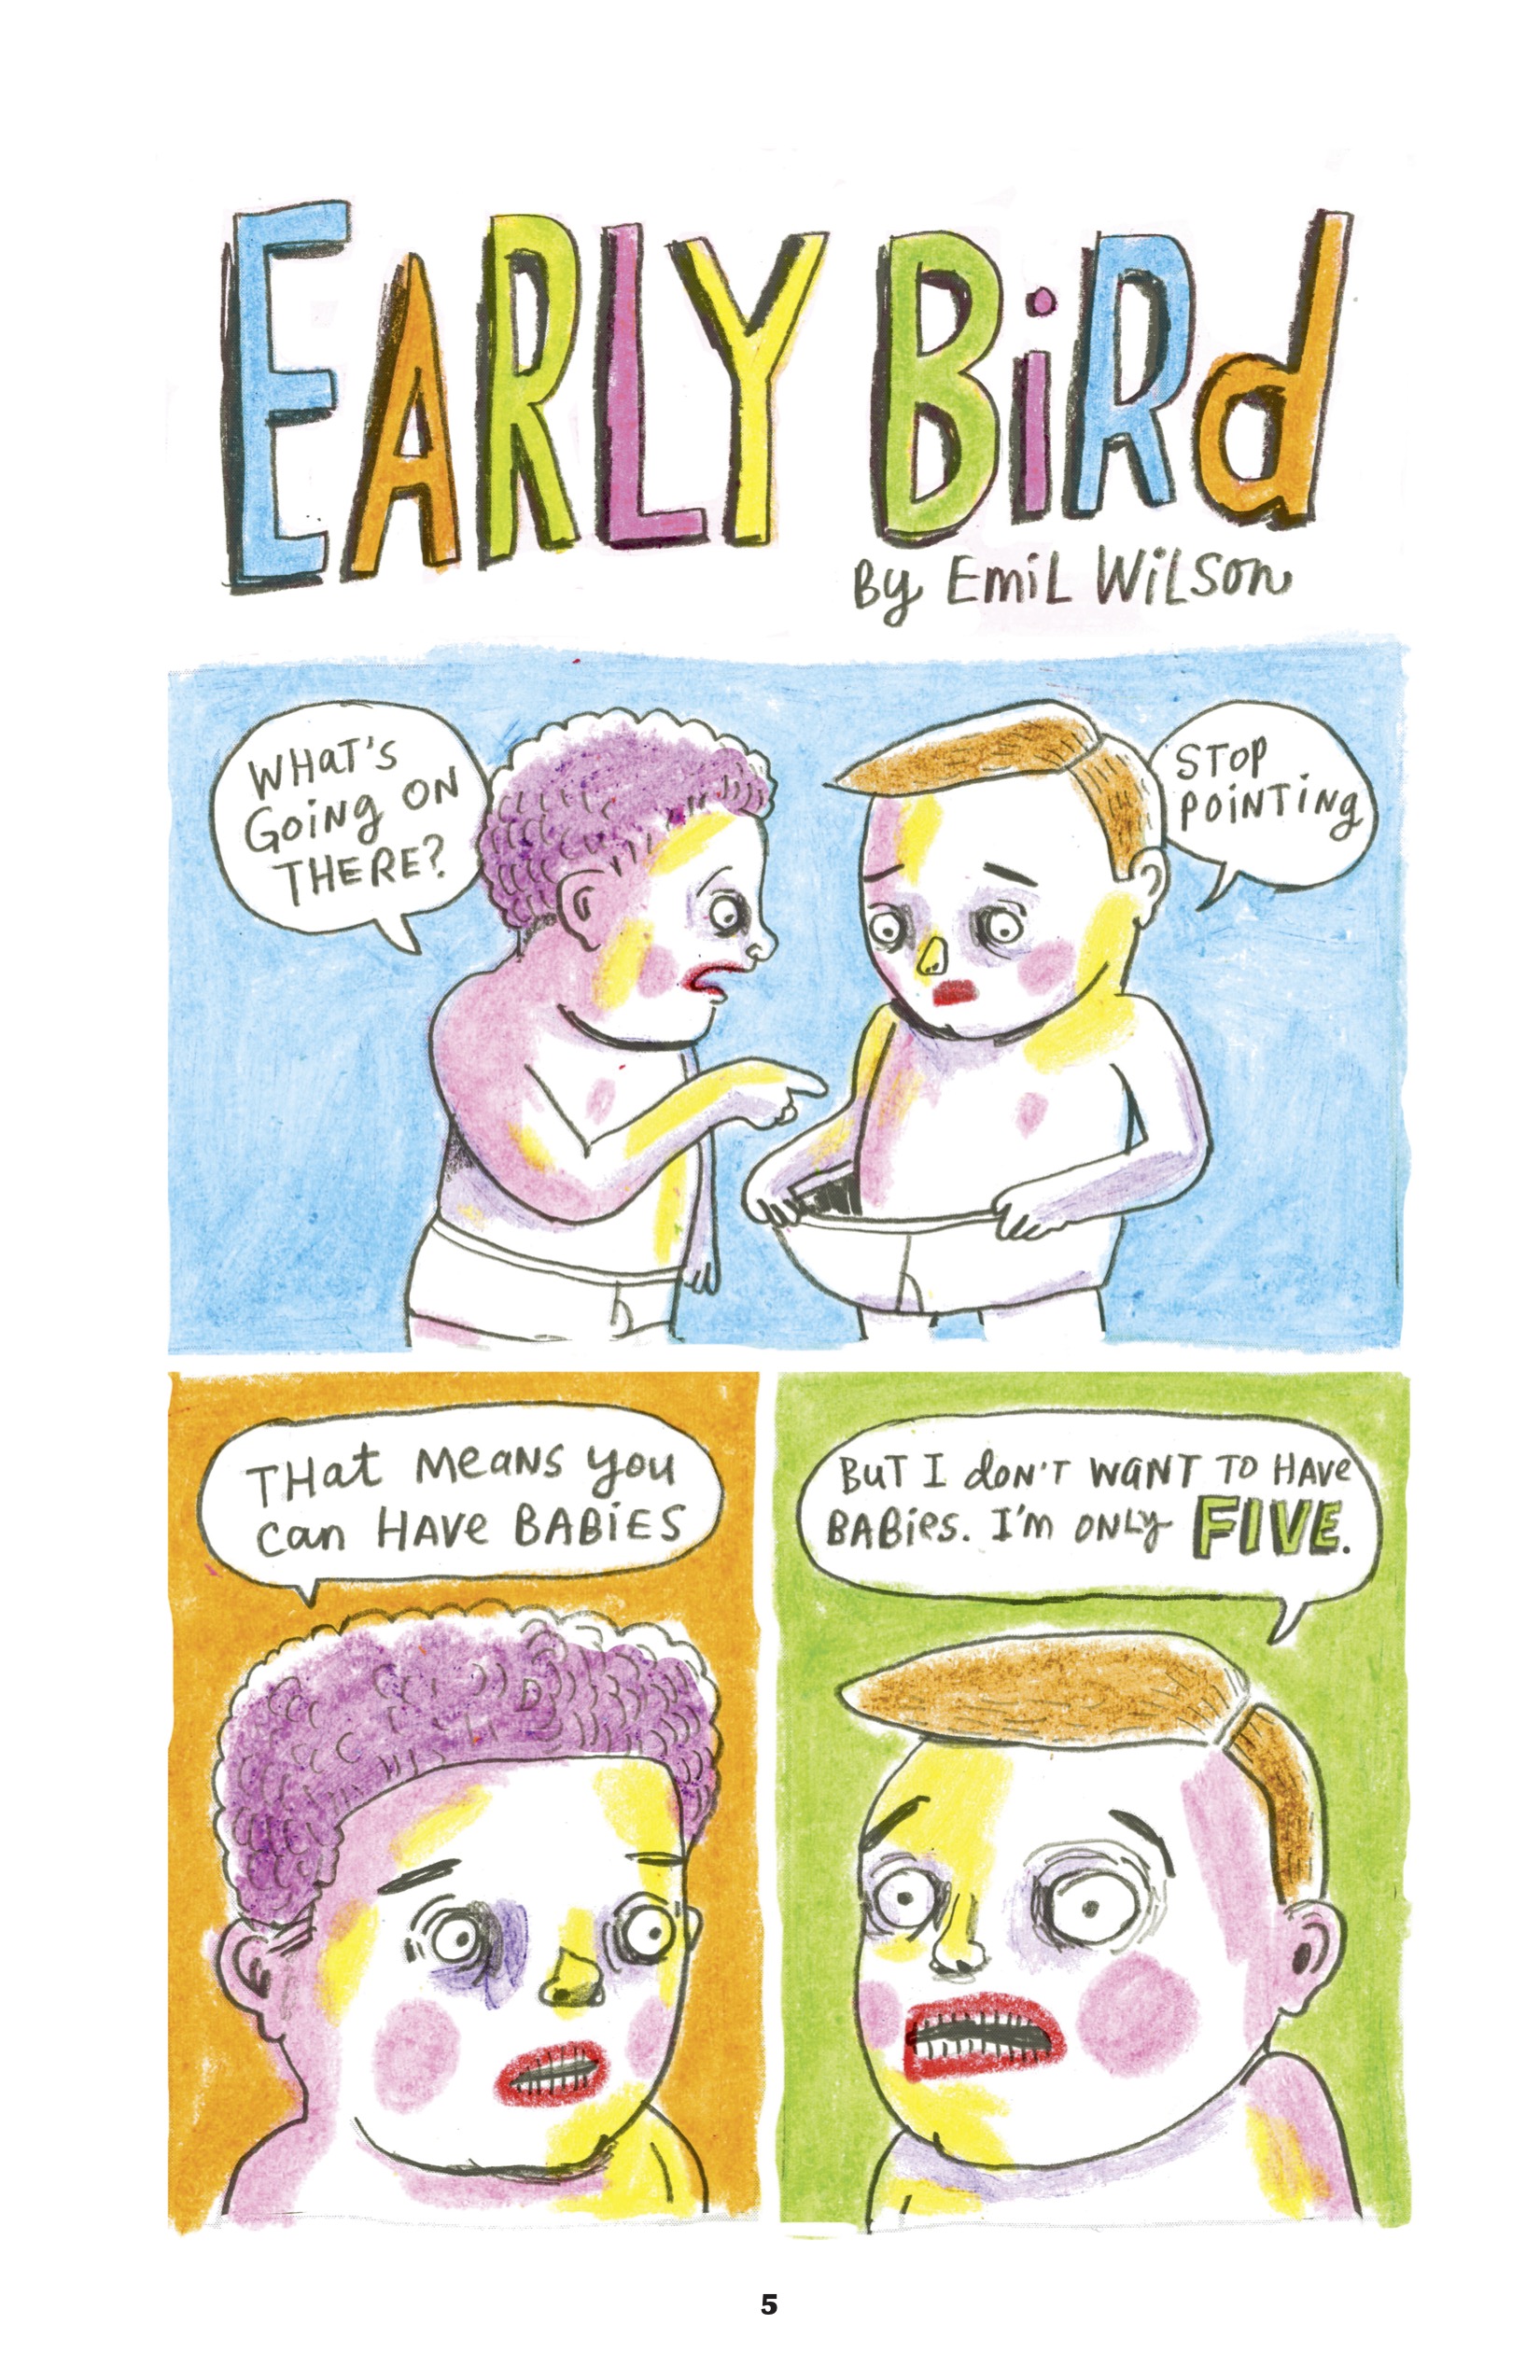 This comic is illustrated with bright watercolors in a predominantly turquoise, orange, green, pink, and yellow palette. Characters have slightly grotesque facial features - wide, sunken eyes, bright red lips, lots of small teeth outlined in black, and big pink blush circles on their cheeks.

The title of the comic is drawn in all caps alternating in the bright colors of the palette: "Early Bird." The byline is written in a font that alternates between capital letters and lowercase cursive: "By Emil Wilson." The lettering of the comic uses this font as well. 

1. A young child with curly pink hair and no clothes except for a diaper points in disbelief at the diaper of the child next to them. This child has straight orange hair and is pulling their diaper away from their skin, looking down at their crotch with an expression of dismay and embarrassment. The first child says, "What's going on there?" The other replies, "Stop pointing." The background is painted with a turquoise wash. 

2. We zoom in on the pink-haired kid's face. Mouth still agape and eyes wide with shocked curiosity, they ask, "That means you can have babies." An orange wash colors the background. 

3. We zoom in on the orange-haired kid's face. Their mouth is also agape and eyes wide with shock, eyebrows raised in anxious concern. They reply, "But I don't want to have babies. I'm only FIVE." The background is green, and the word 'five' is emphasized with green, all-caps block letters.